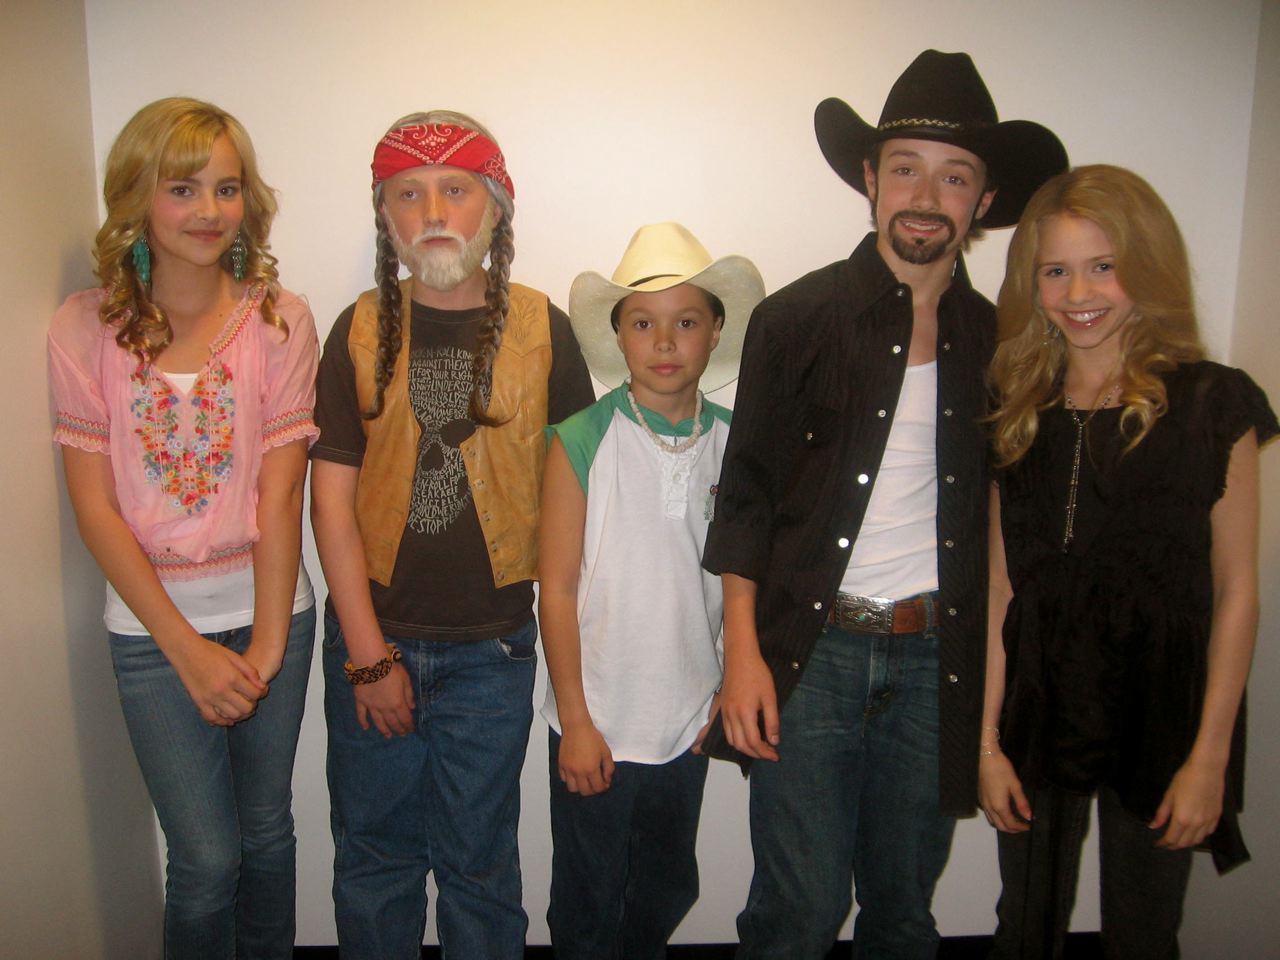 2006 CMT Award Show - 5th grade country music stars